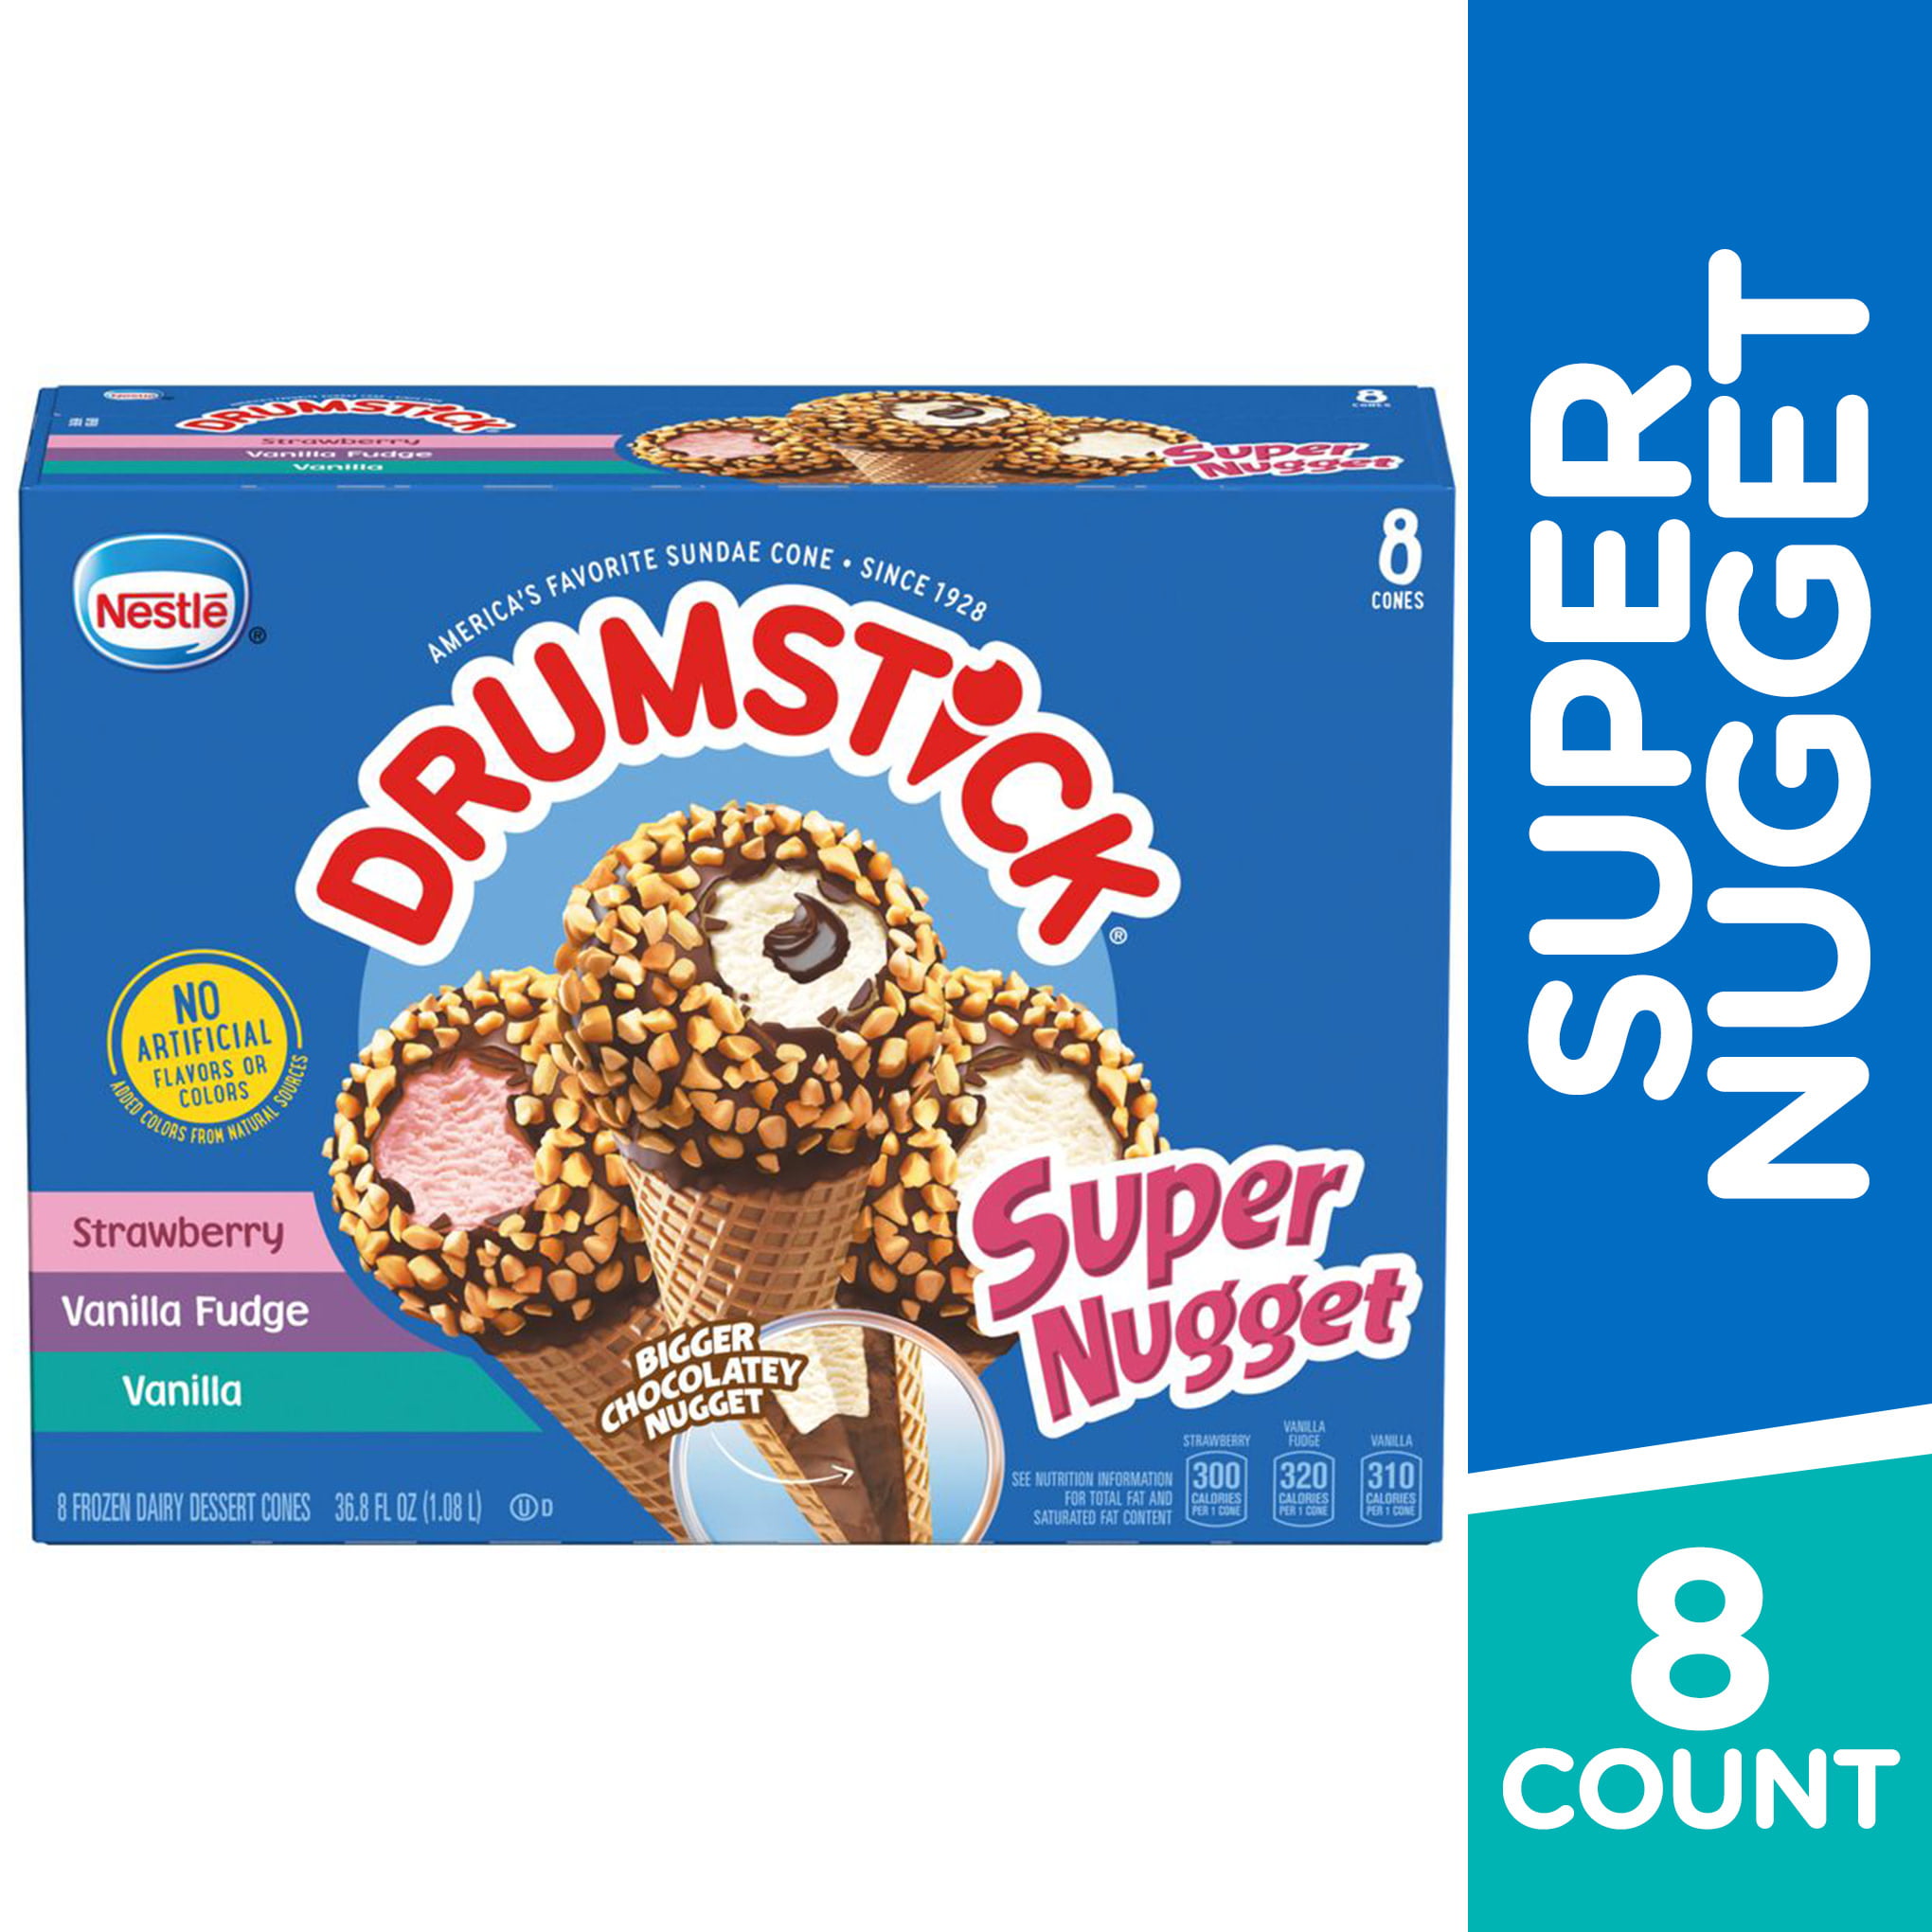 Nestle Drumstick Super Nugget Cones Variety Pack, 8 Count